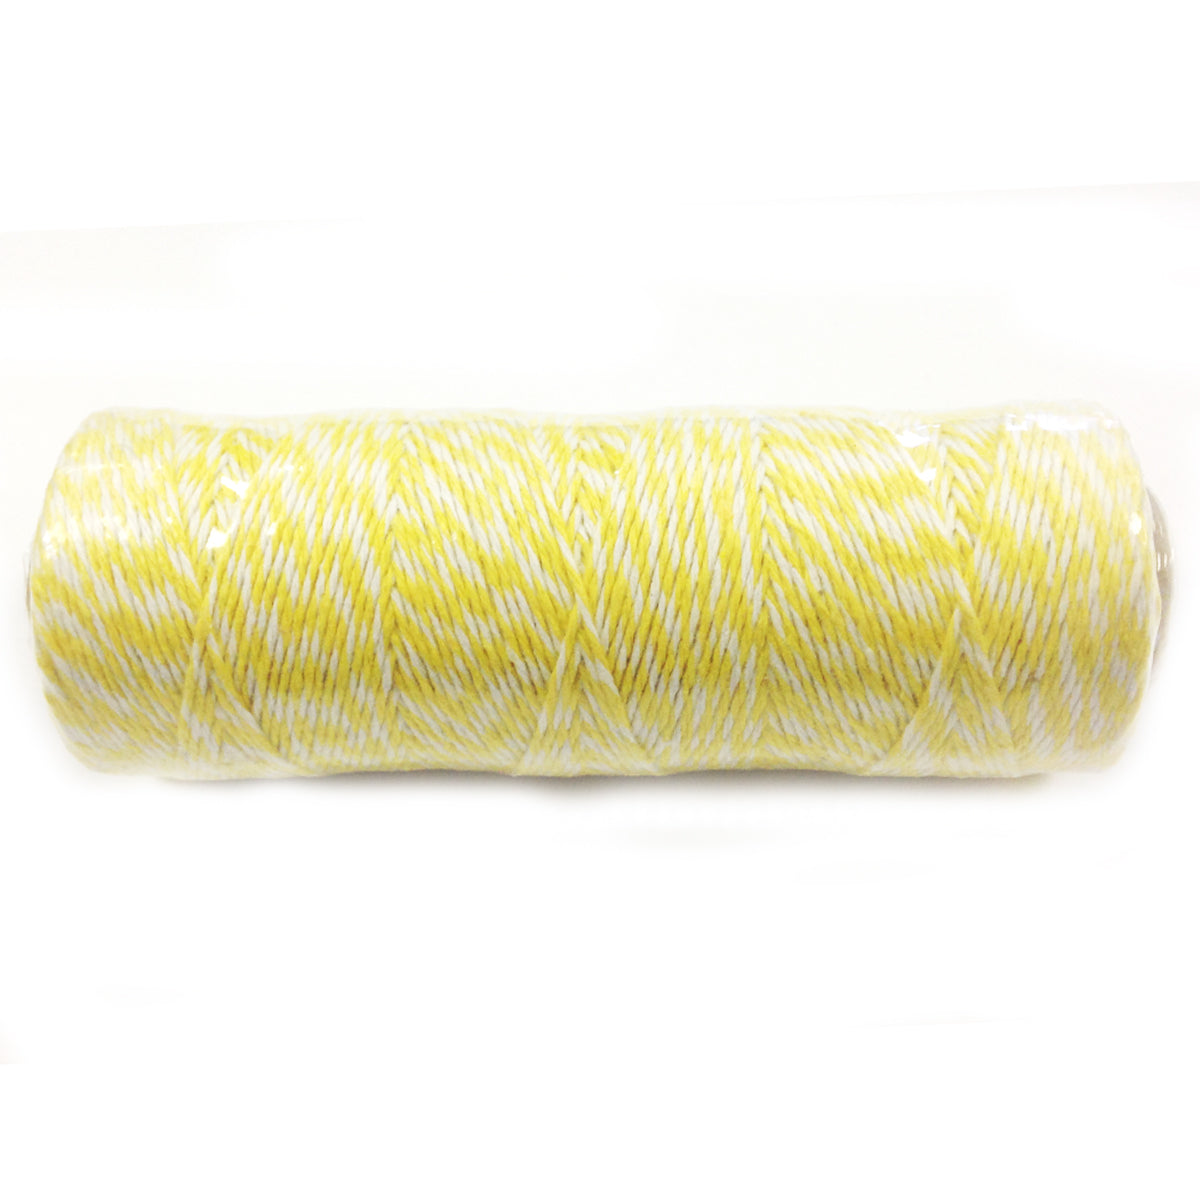 Wrapables Cotton Baker's Twine 4ply 110 Yard